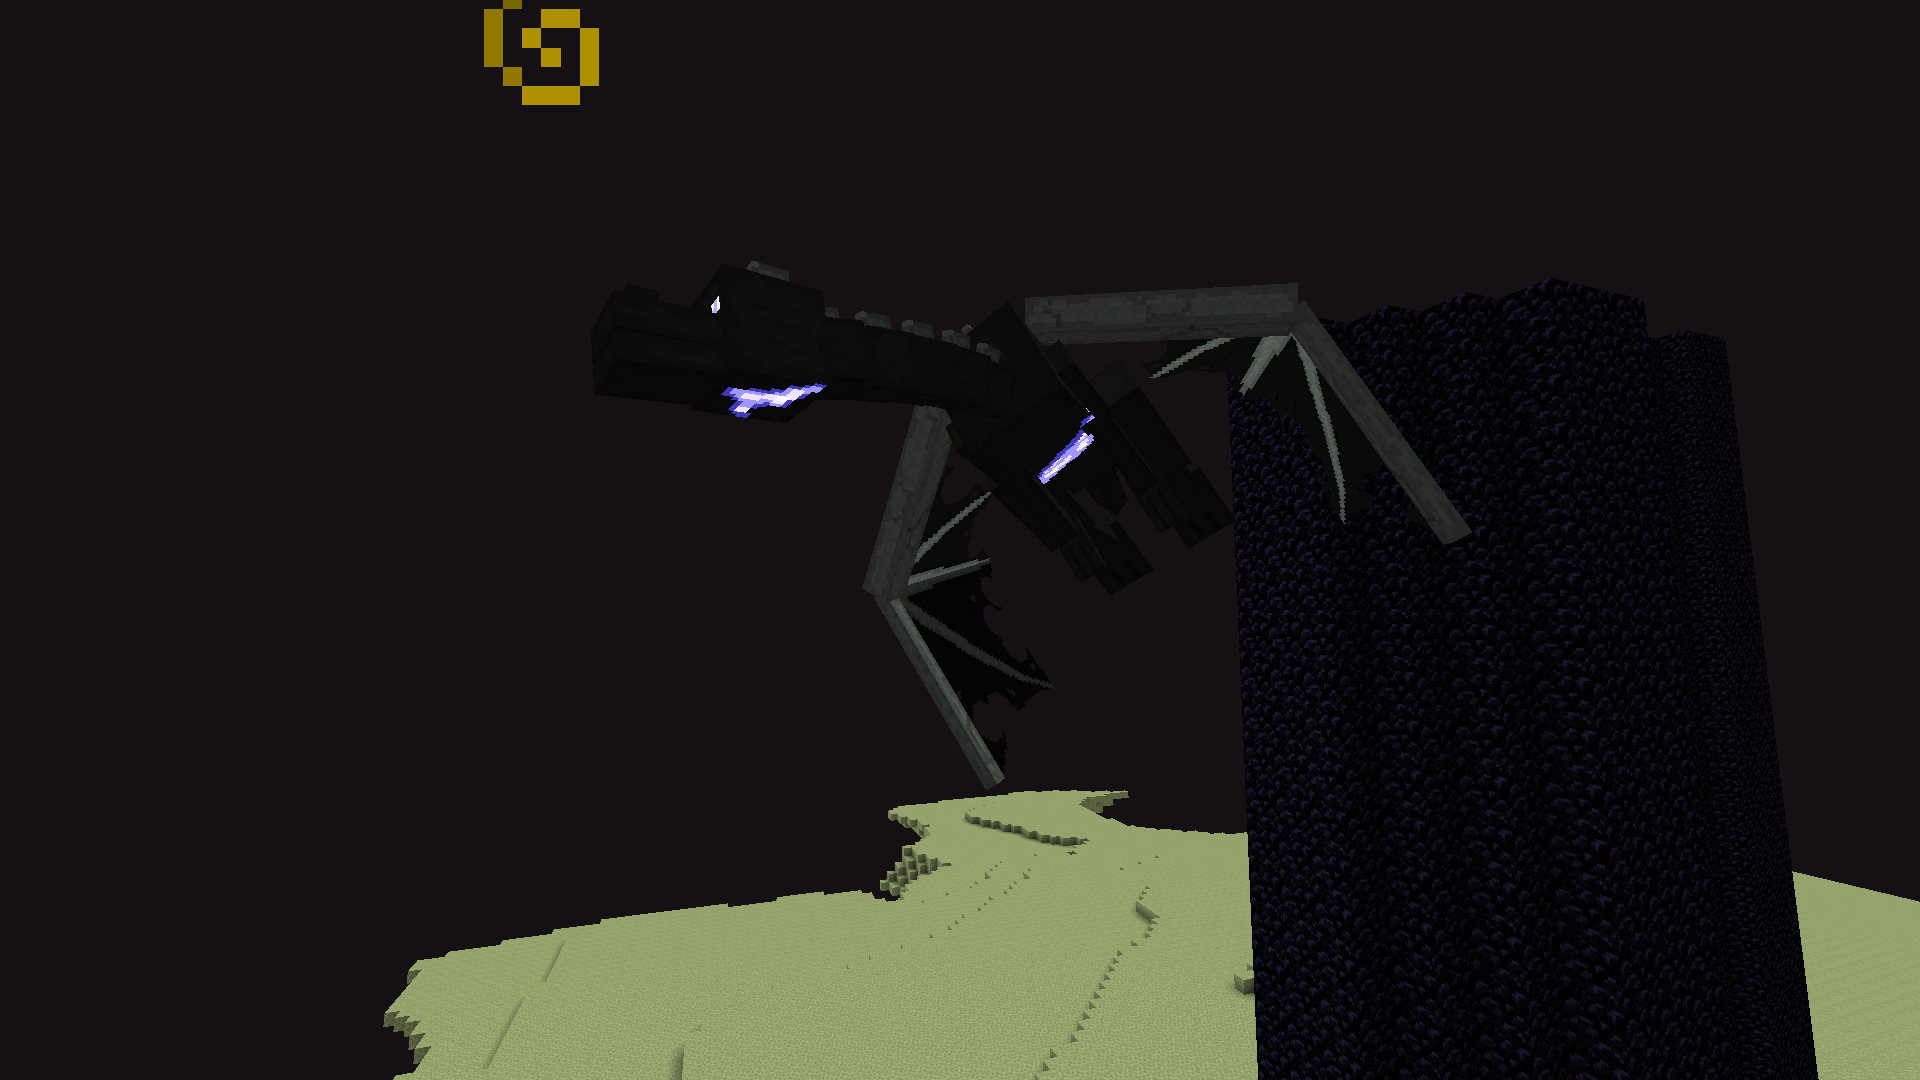 The Ender Dragon in his last phase about to die